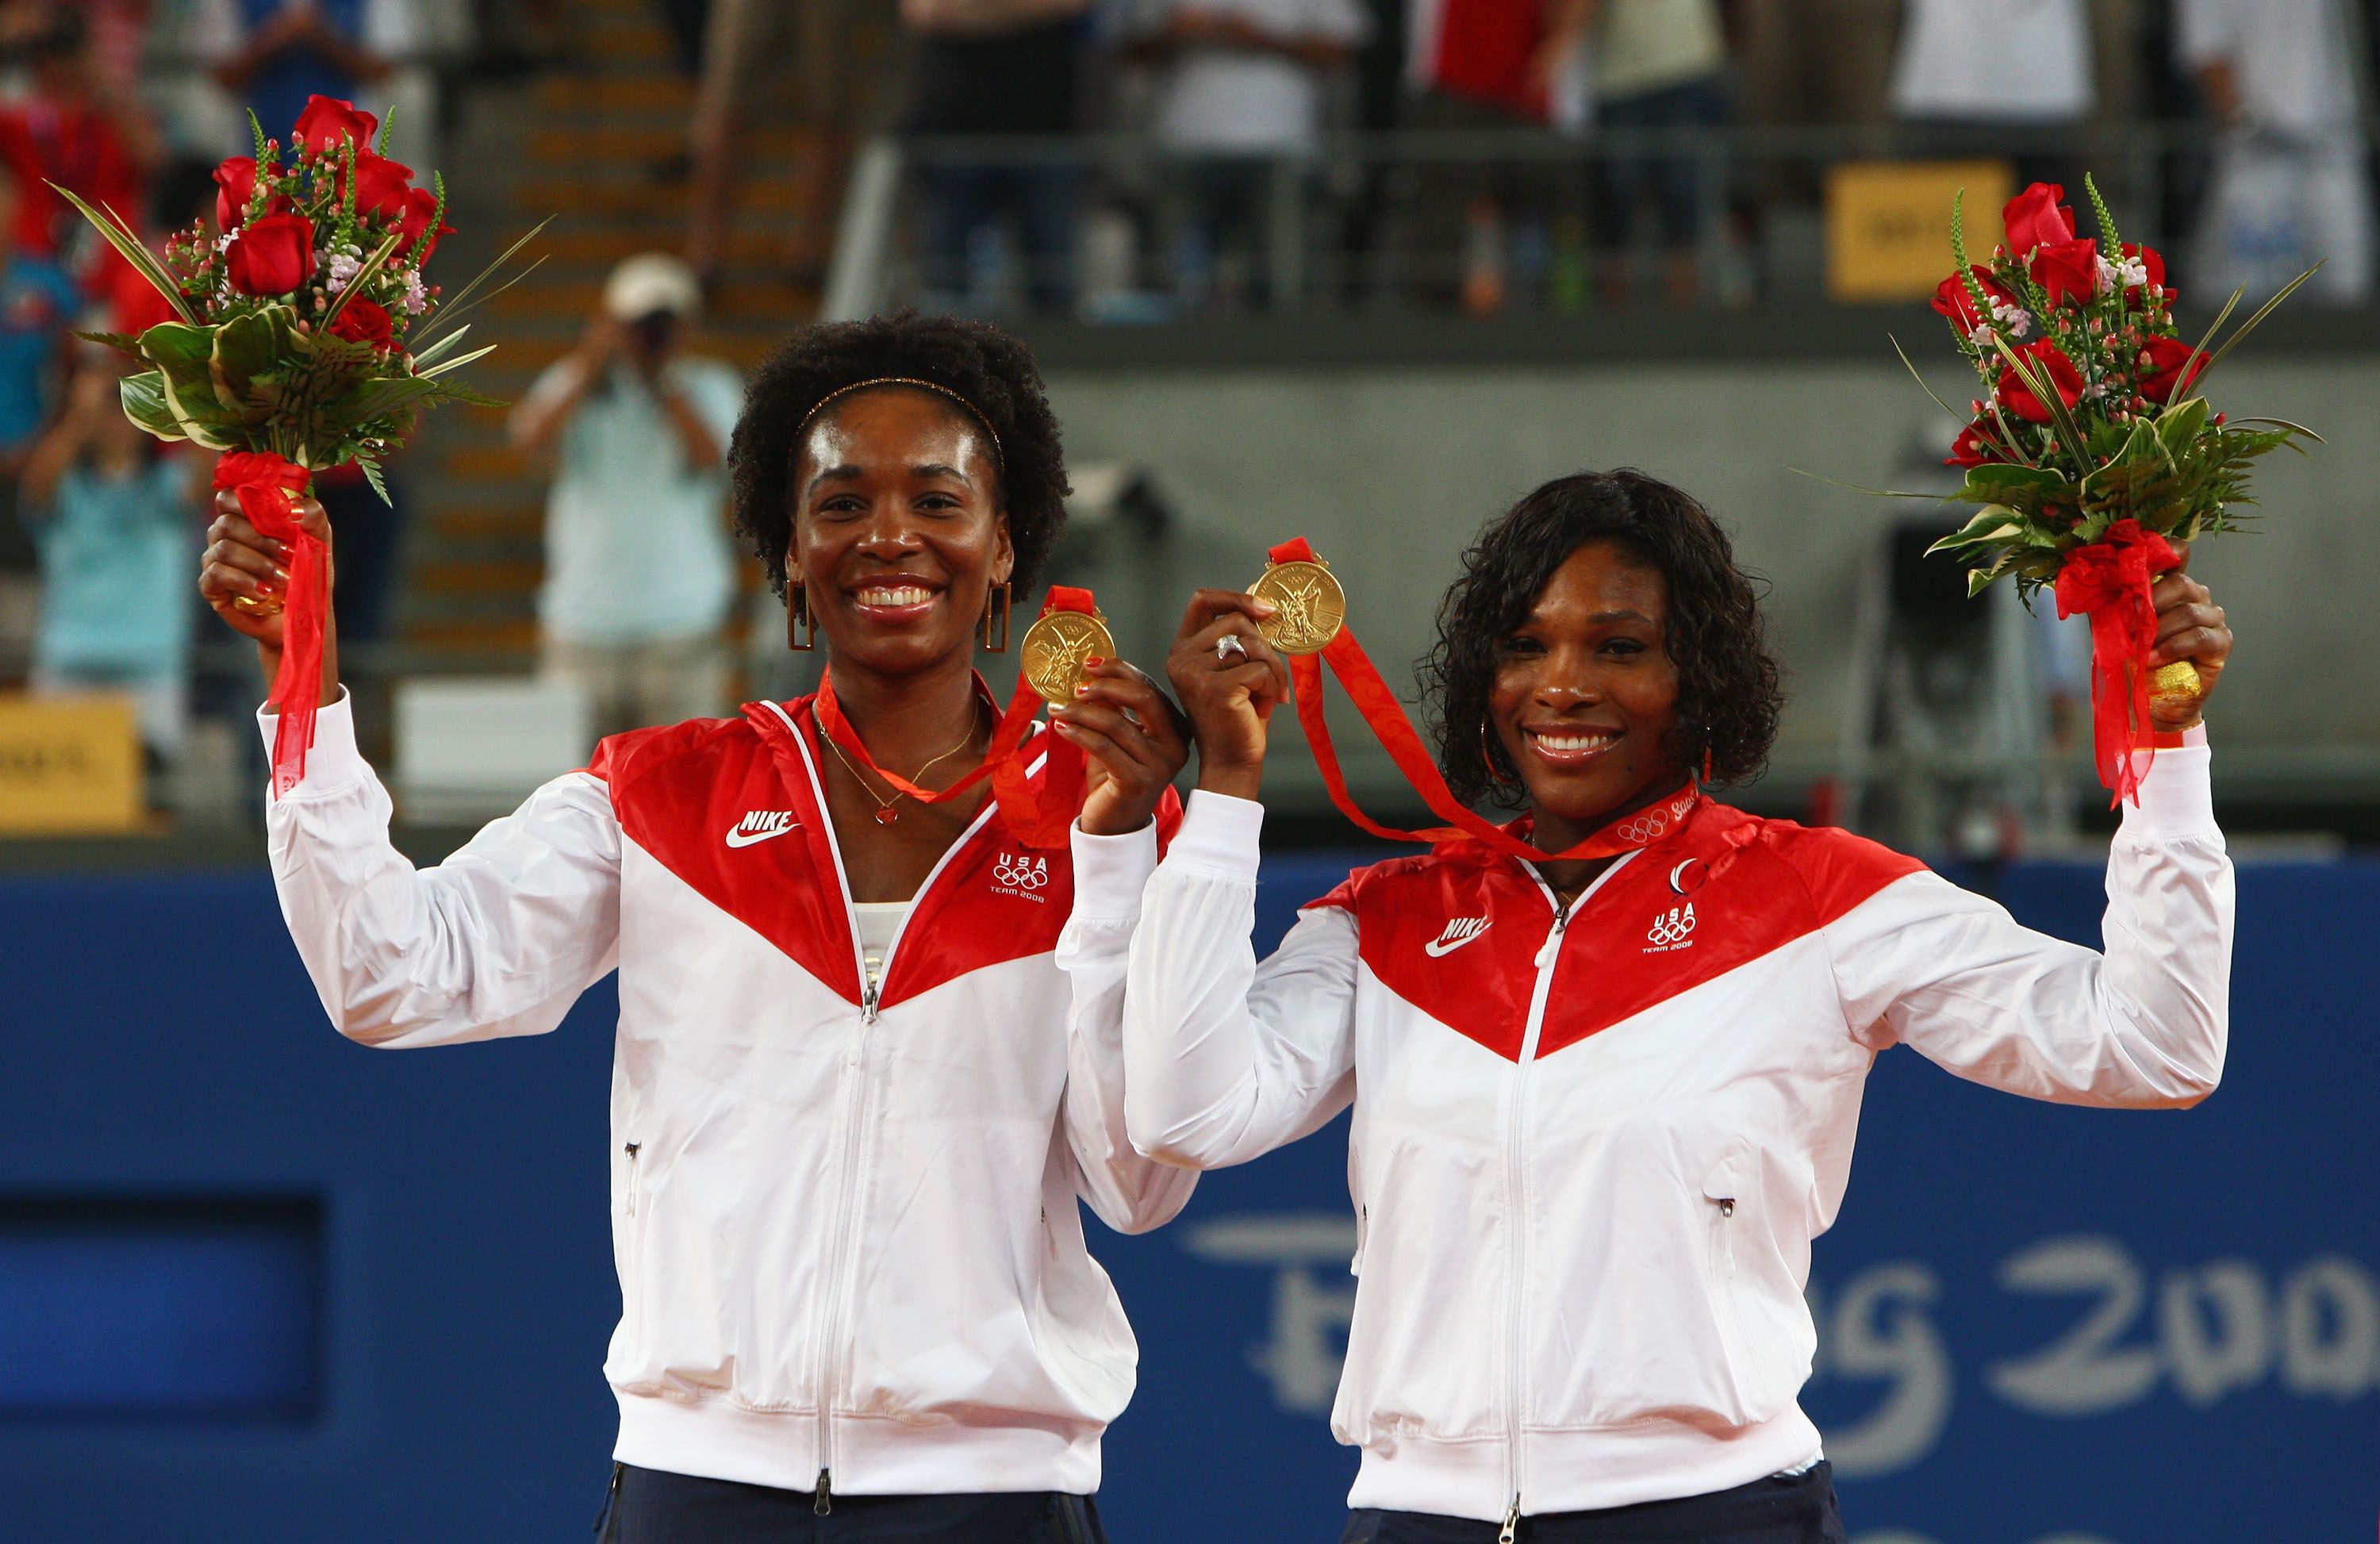 Venus Williams and Serena Williams won Olympic gold medals